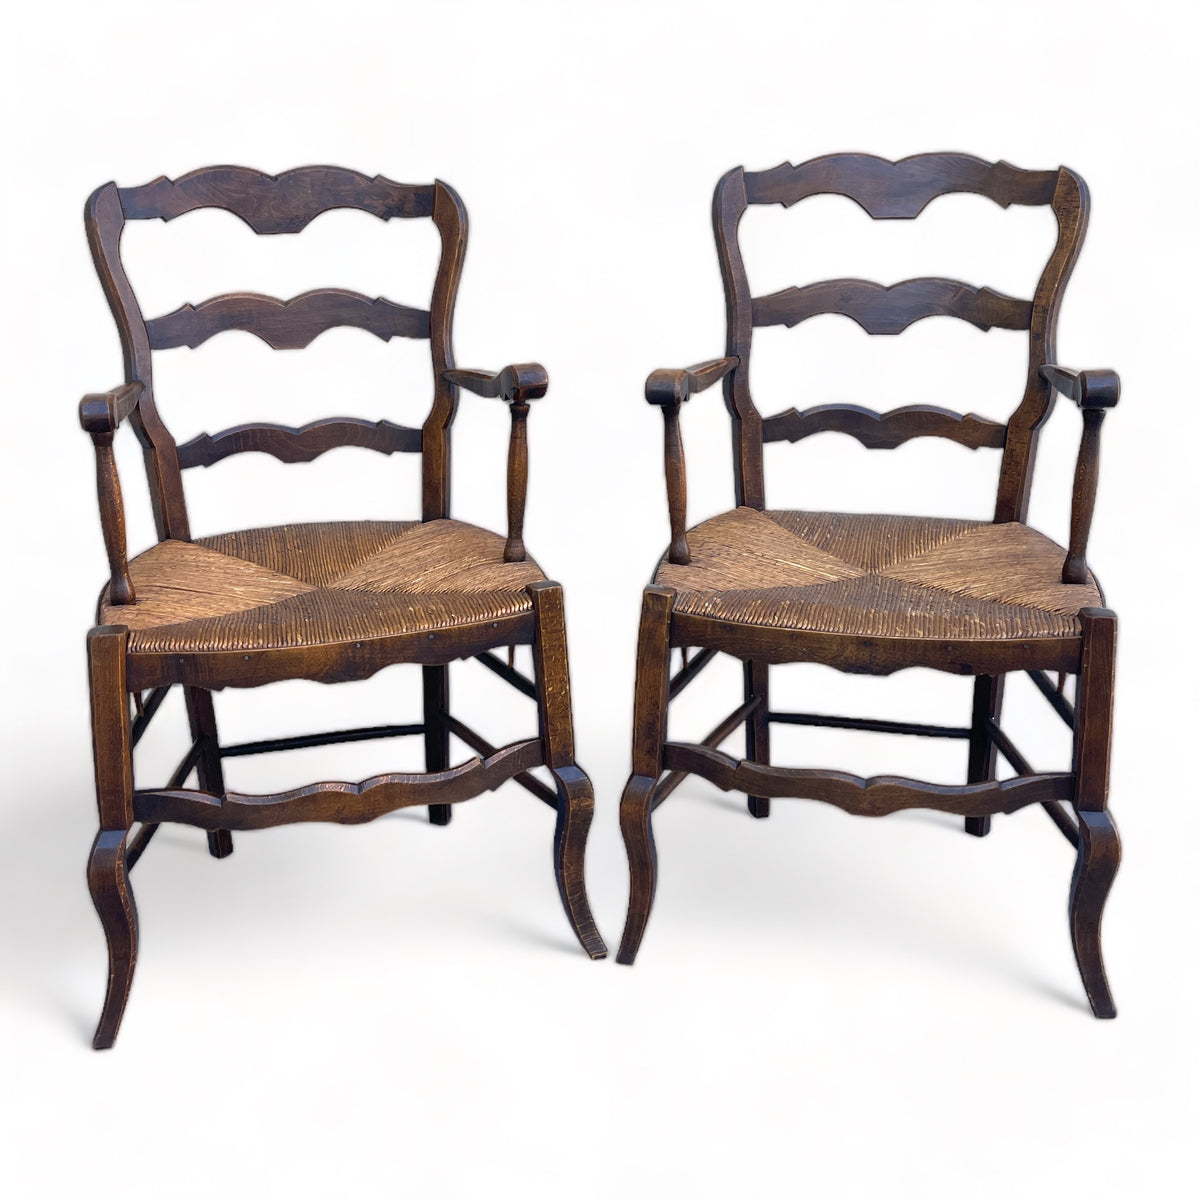 Pair of Country French Armchairs